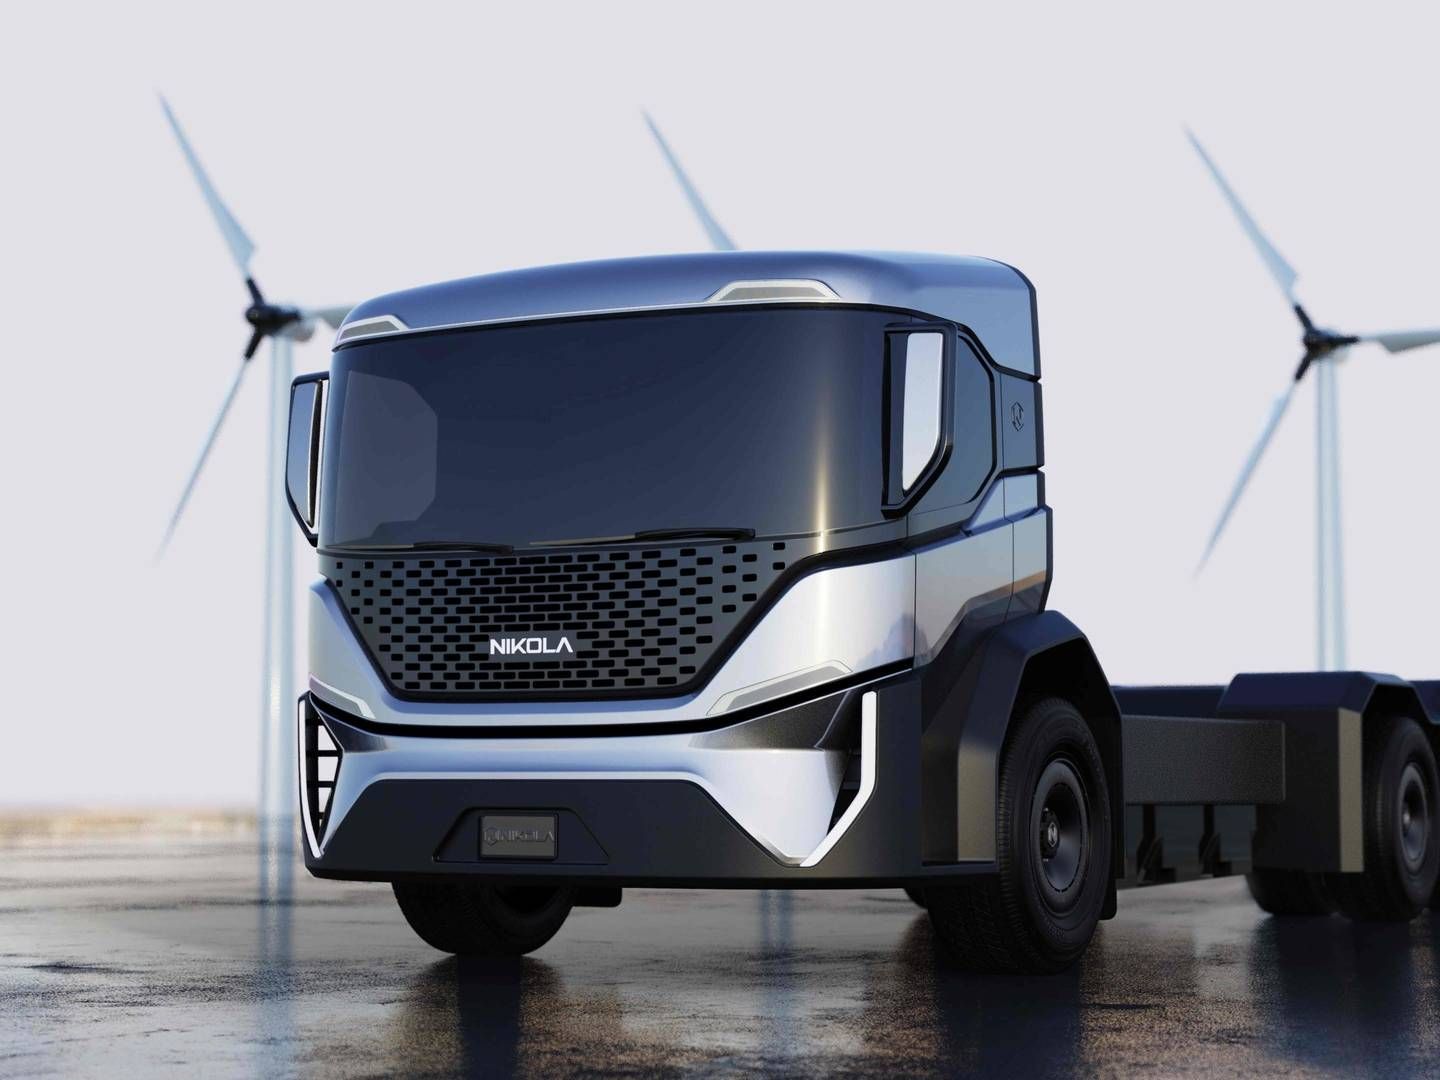 One of the allegations against Nikola Motor is that its semi-truck, Nikola One, was dysfunctional when presented in 2016. Photo shows Nikola's electric trash truck of which Repubic Services ordered 2,500 units last month. | Photo: -/AFP / Nikola Motor